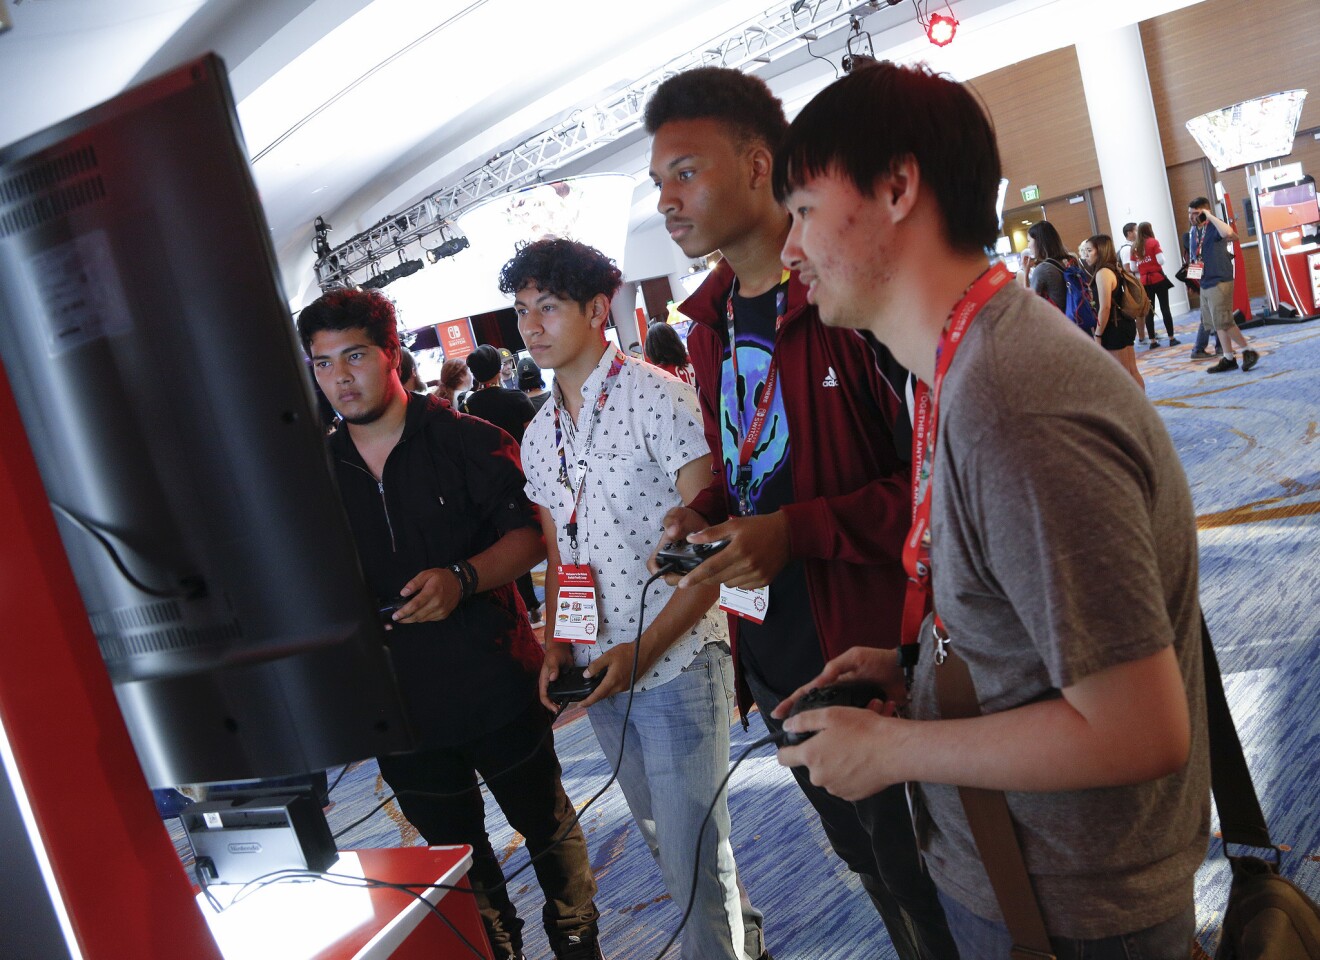 Small groups of friends demo the new Super Smash Bros Ultimate video game at Comic-Con 2018 in San Diego.